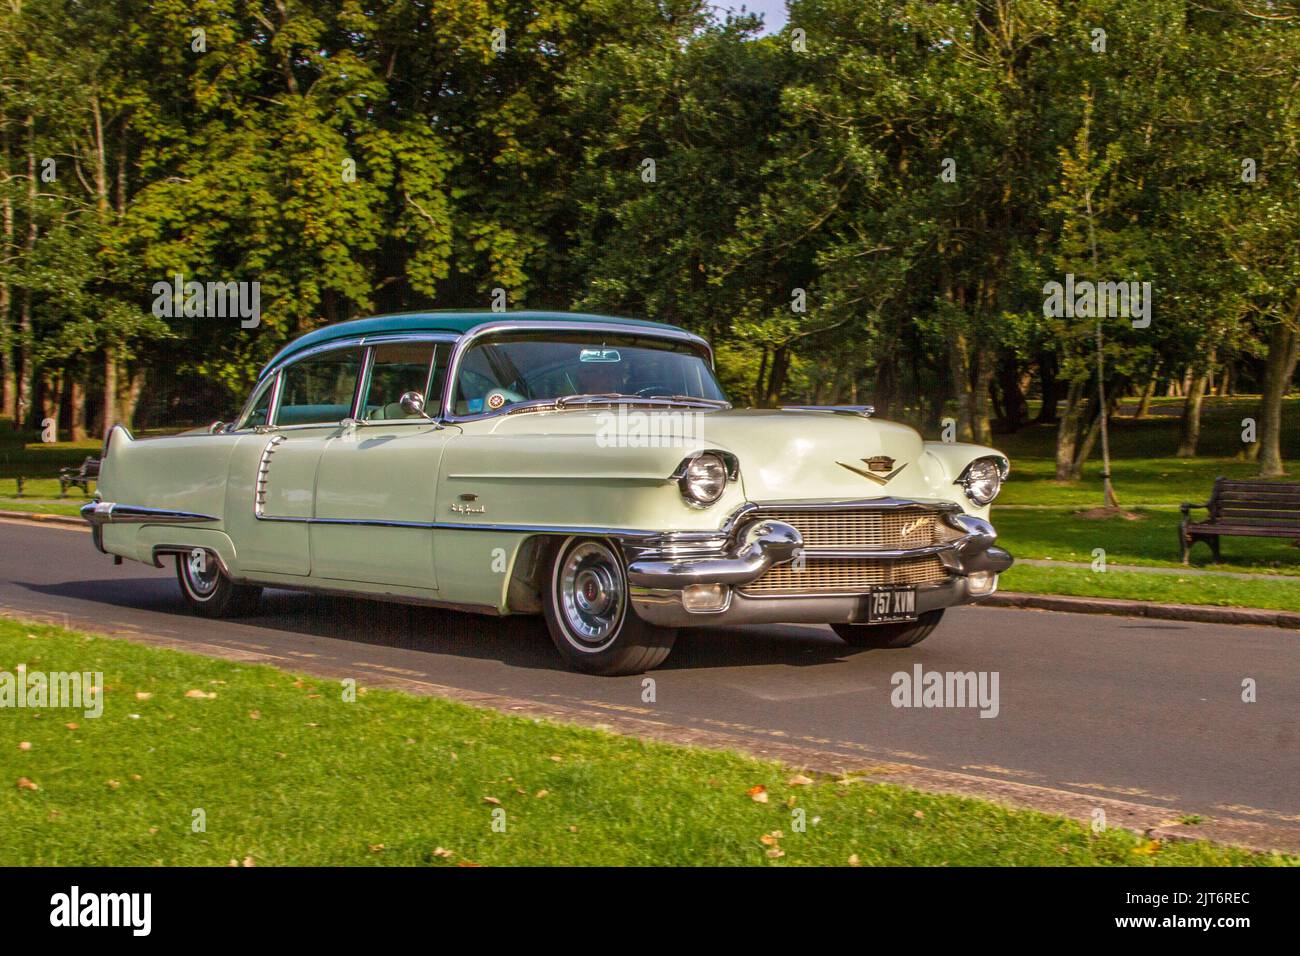 1956 50s fifties Green American 1956 Cadillac De Ville Auto 6000cc Petrol; arriving at The annual Stanley Park Classic Car Show in the Italian Gardens. Stanley Park classics yesteryear Motor Show Hosted By Blackpool Vintage Vehicle Preservation Group, UK. Stock Photo